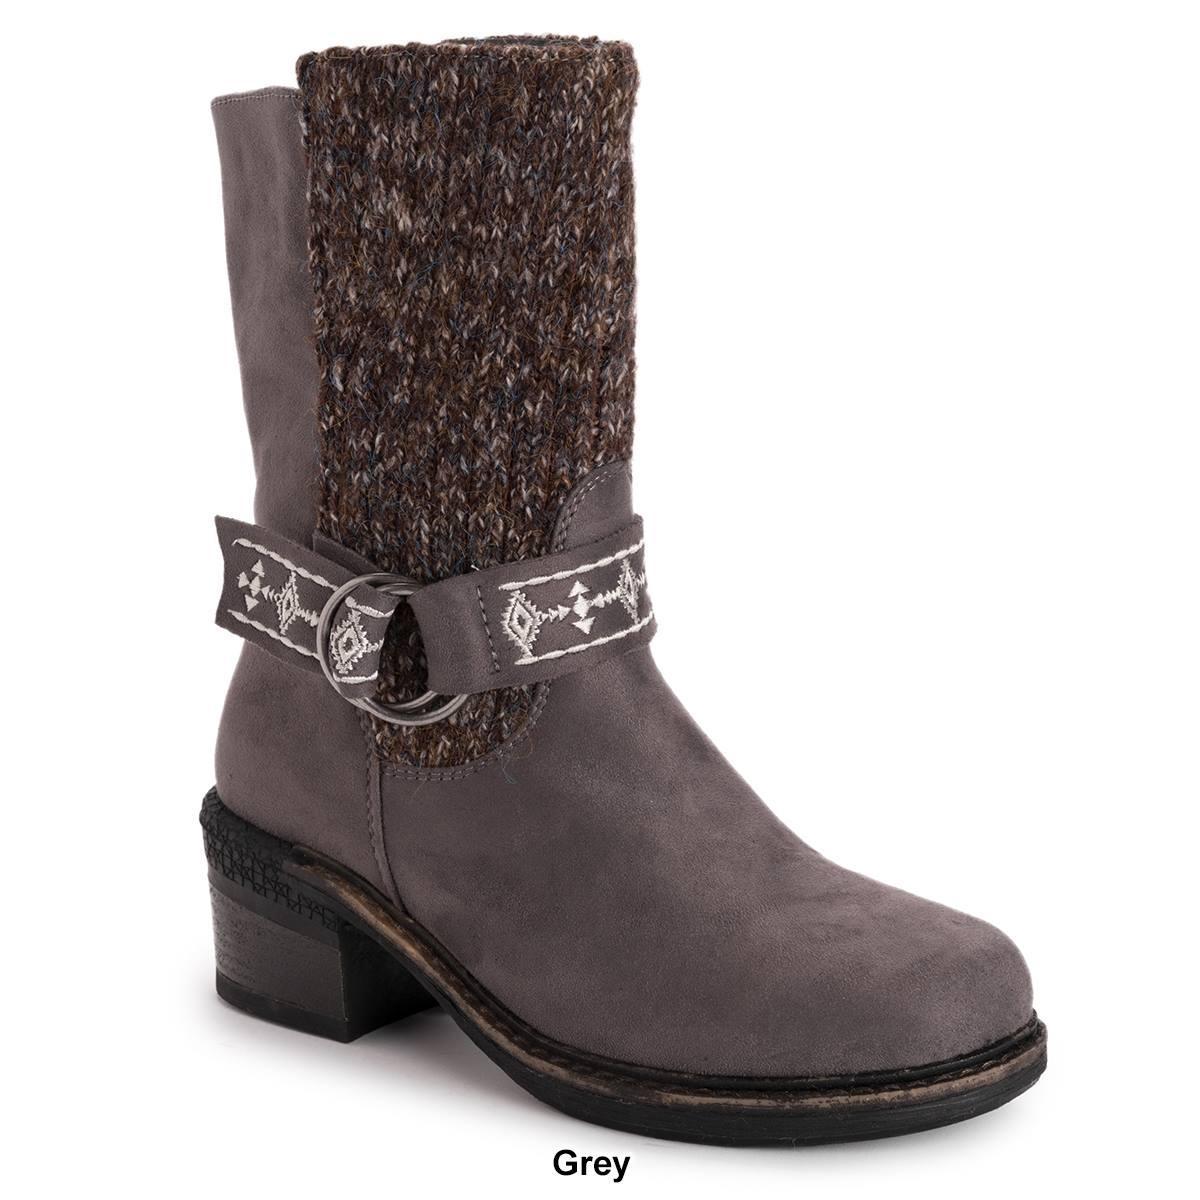 Womens Essentials by MUK LUKS(R) Arya Alice Boots Product Image